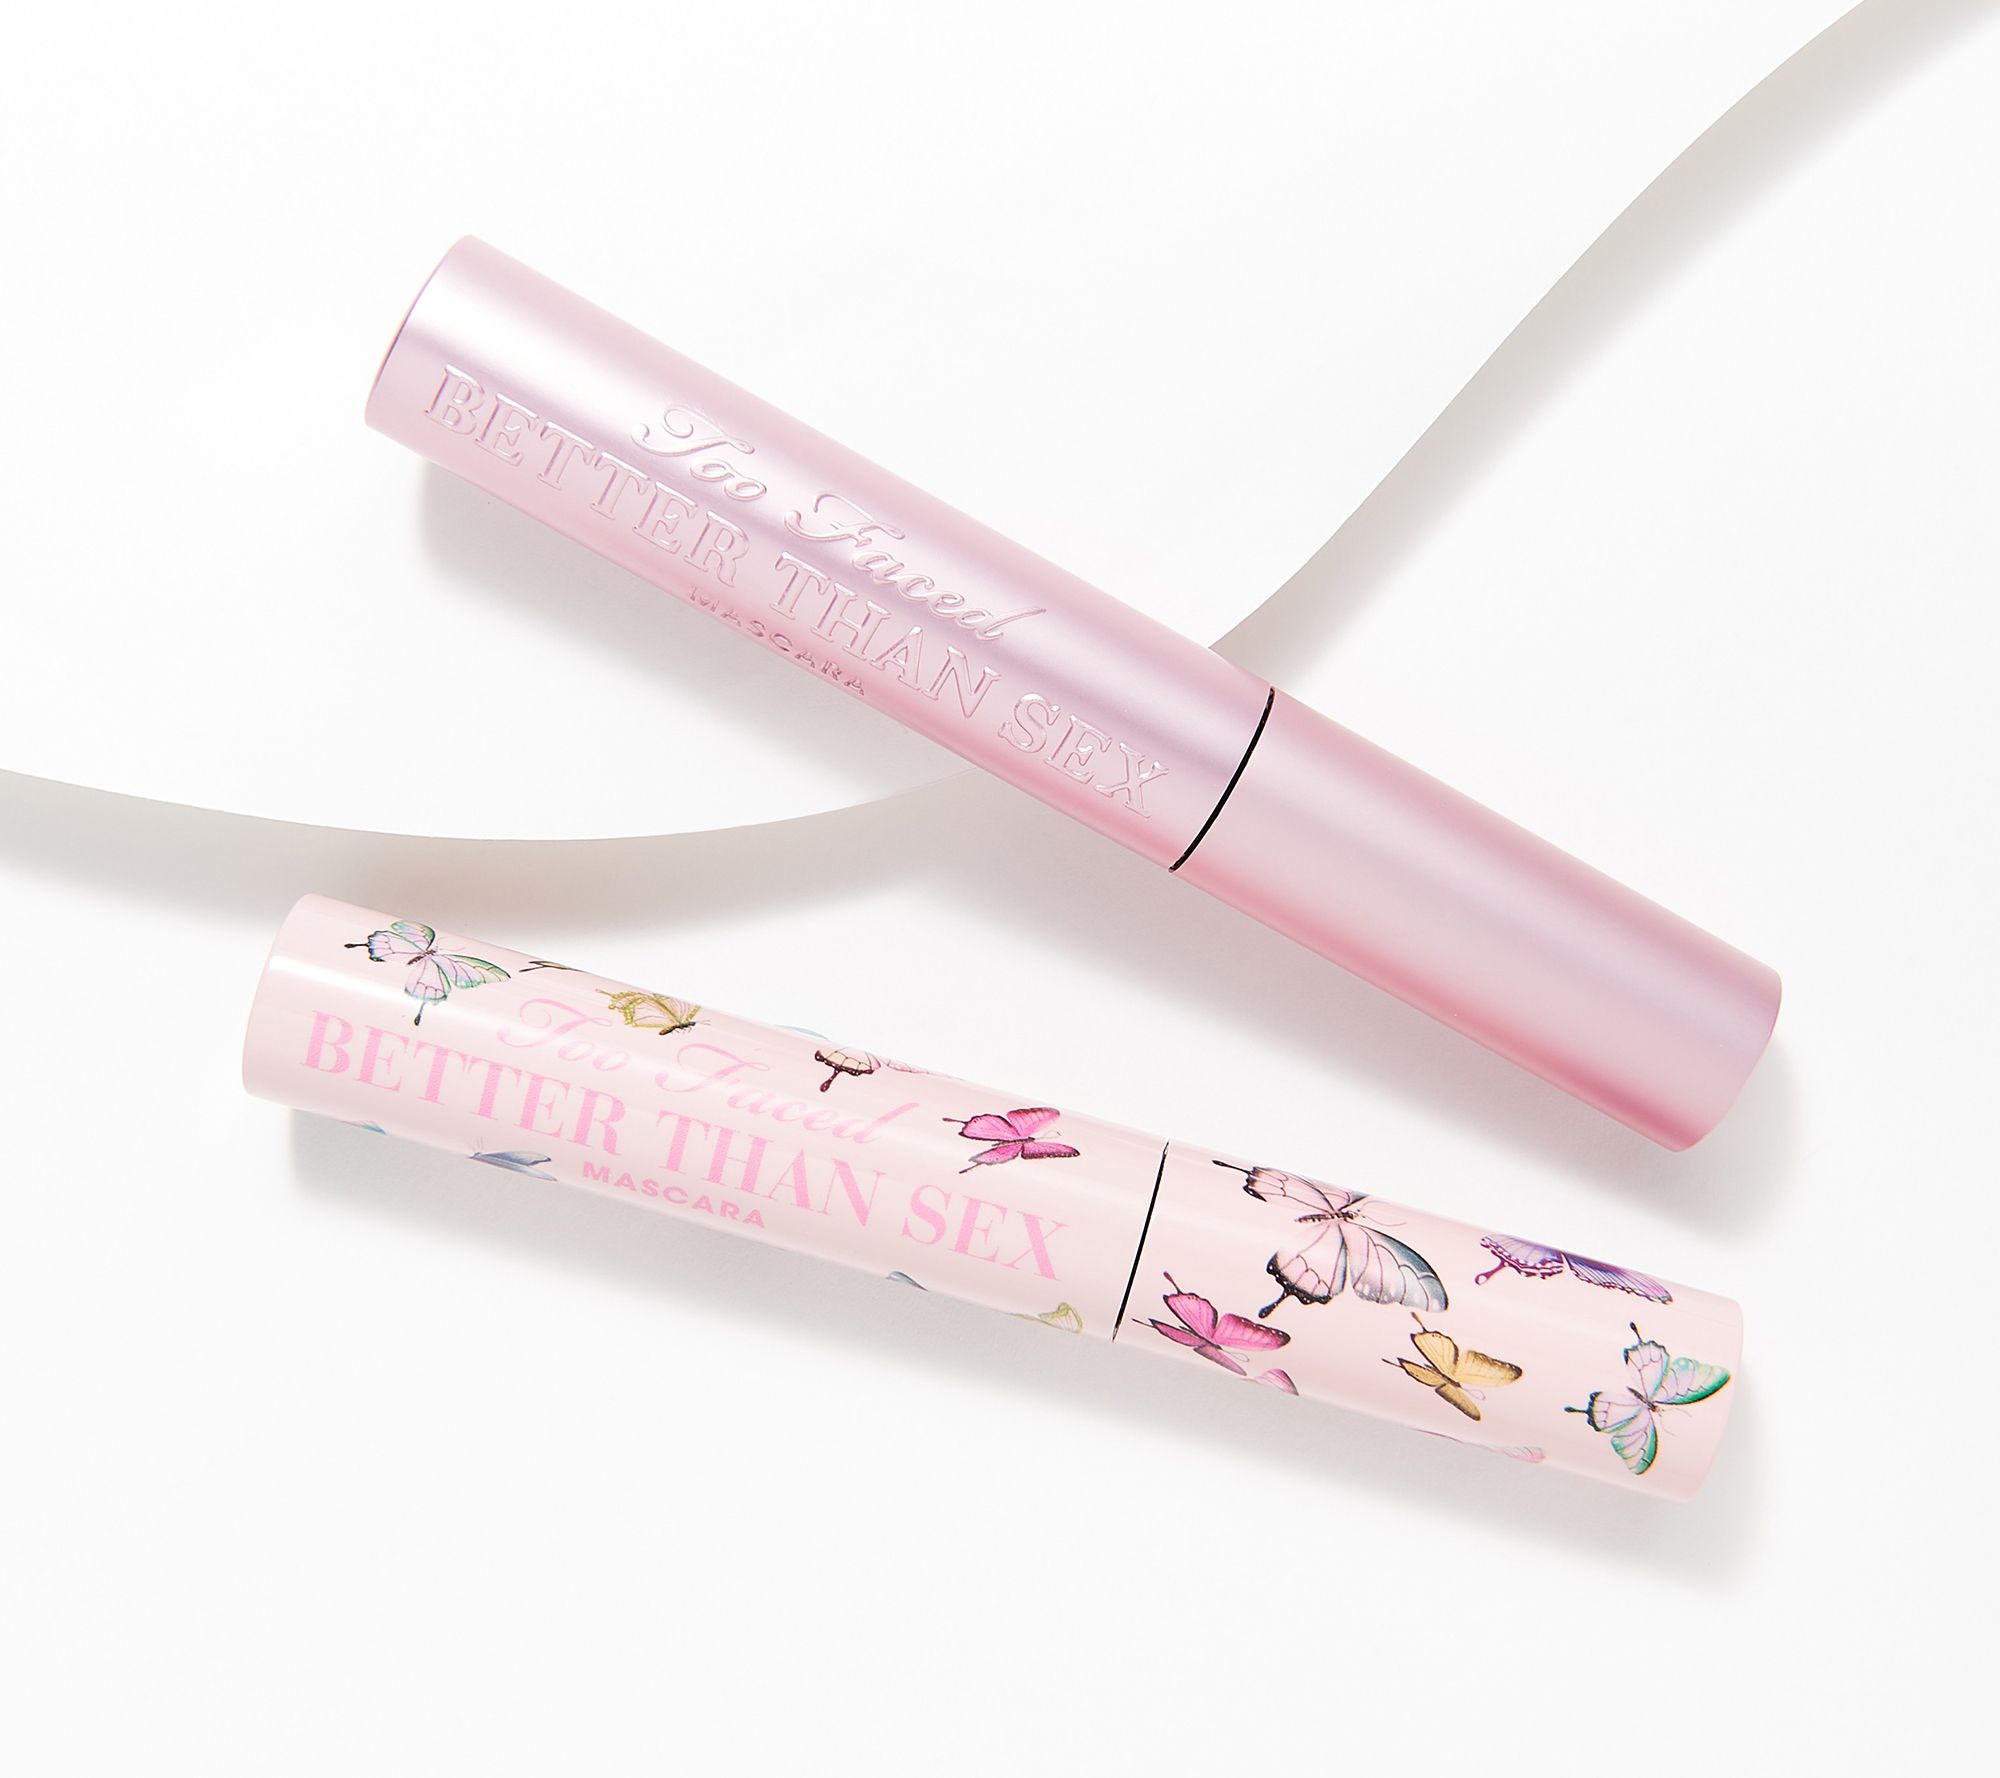 Too Faced Special Edition Better Than Sex Mascara Duo